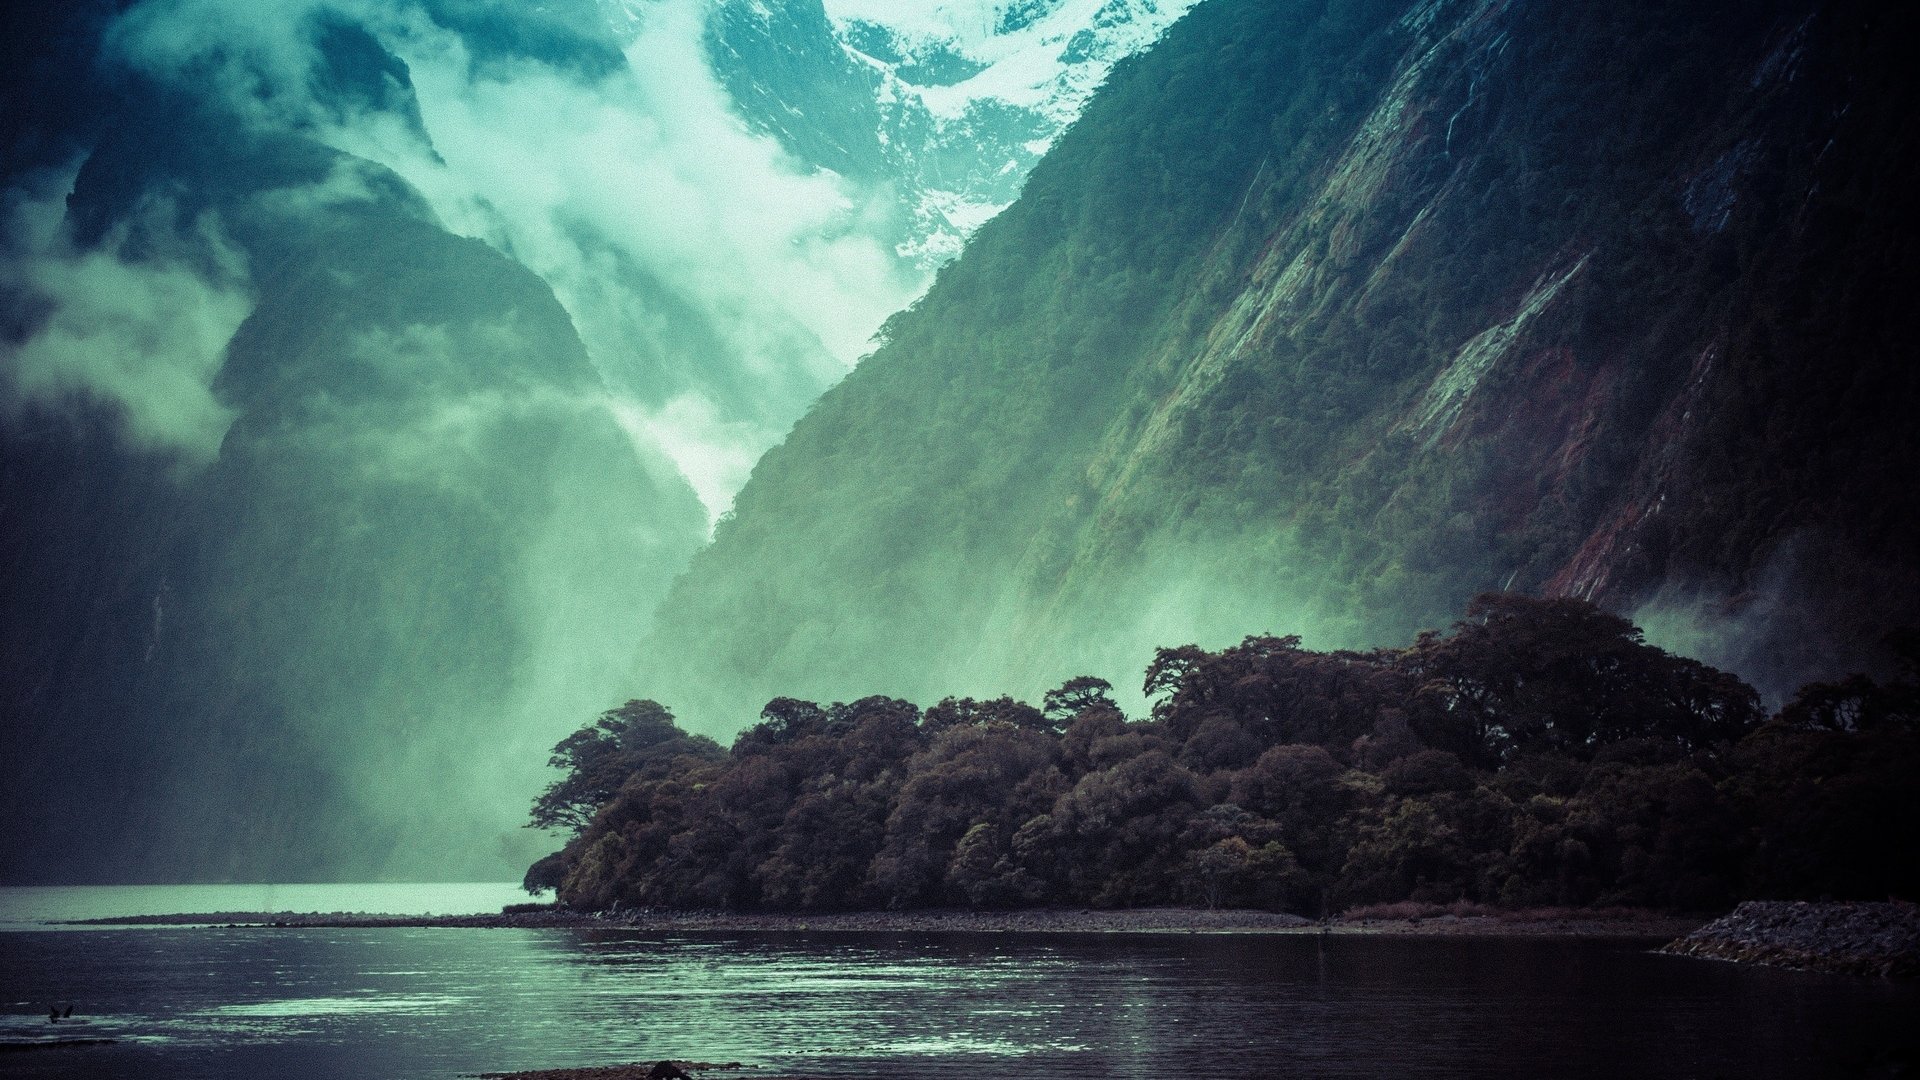 General 1920x1080 mountains landscape mist clouds river trees forest nature Milford Sound New Zealand fjord